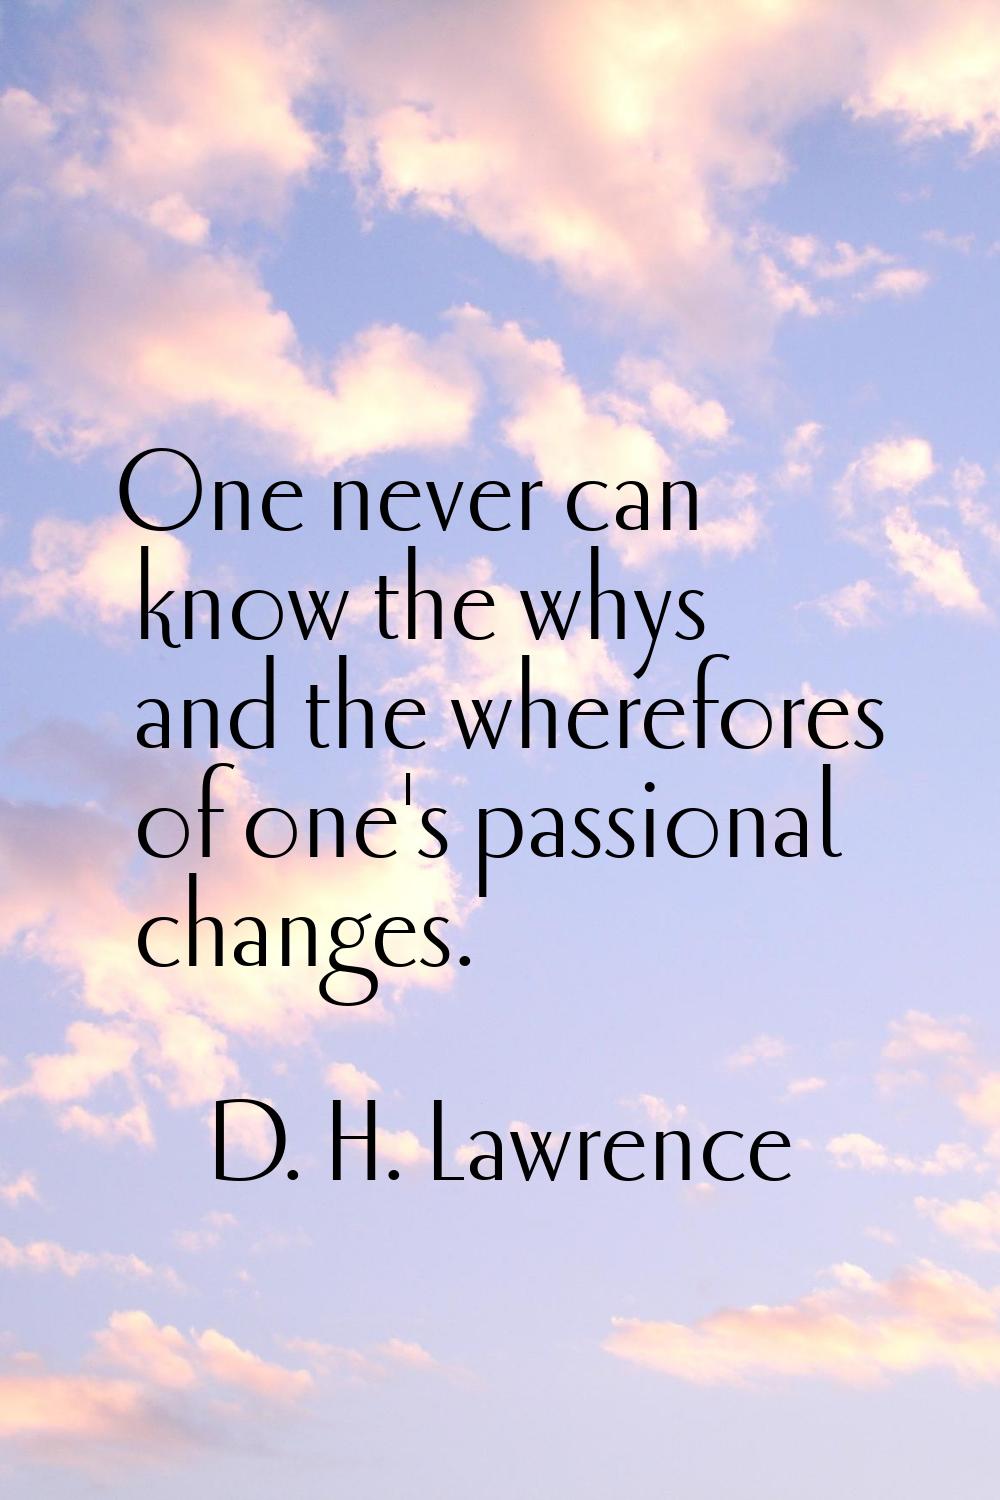 One never can know the whys and the wherefores of one's passional changes.